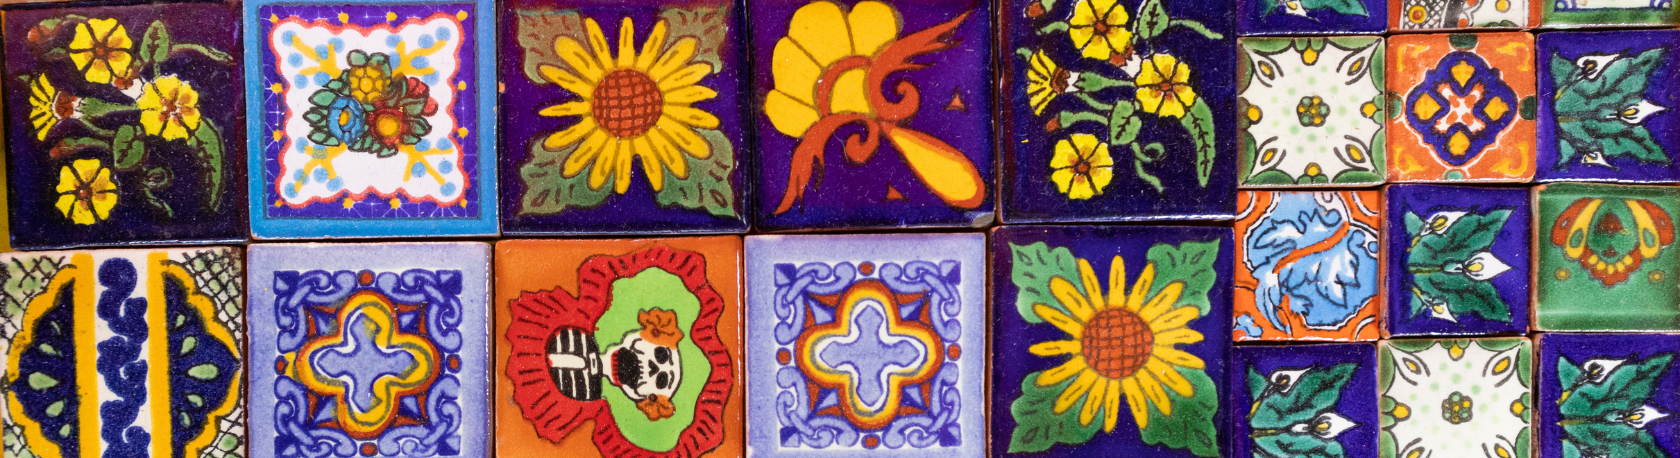 Pick up new Spanish vocabulary and hear what makes Spanish-Mexican Talavera pottery so special